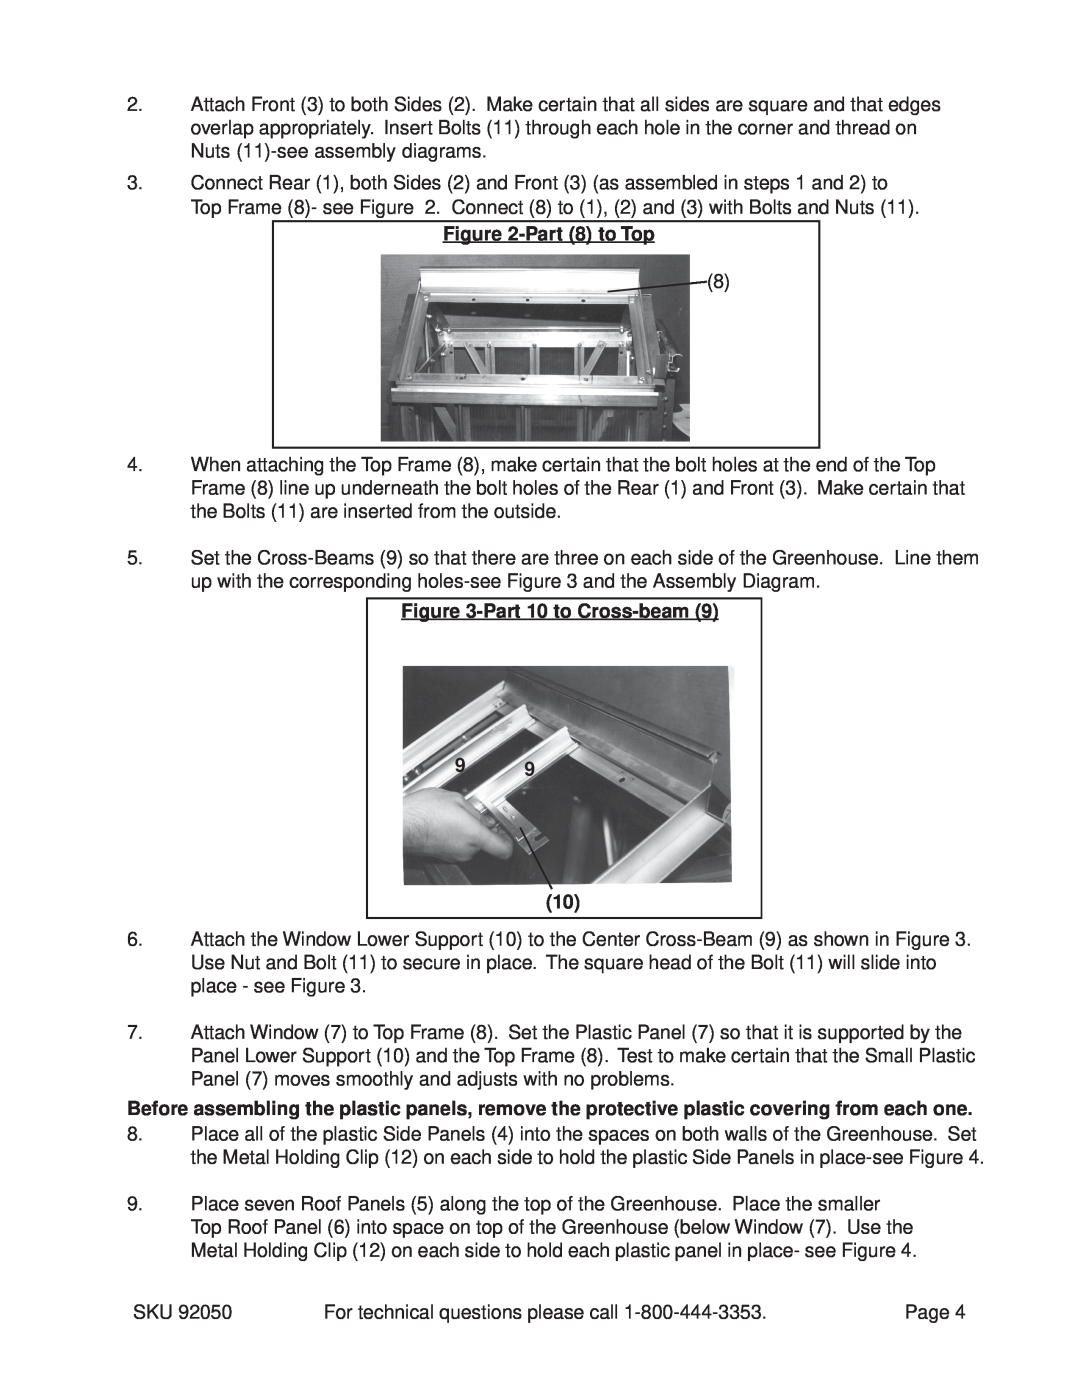 Harbor Freight Tools 92050 operating instructions Part8 to Top, Part10 to Cross-beam9 